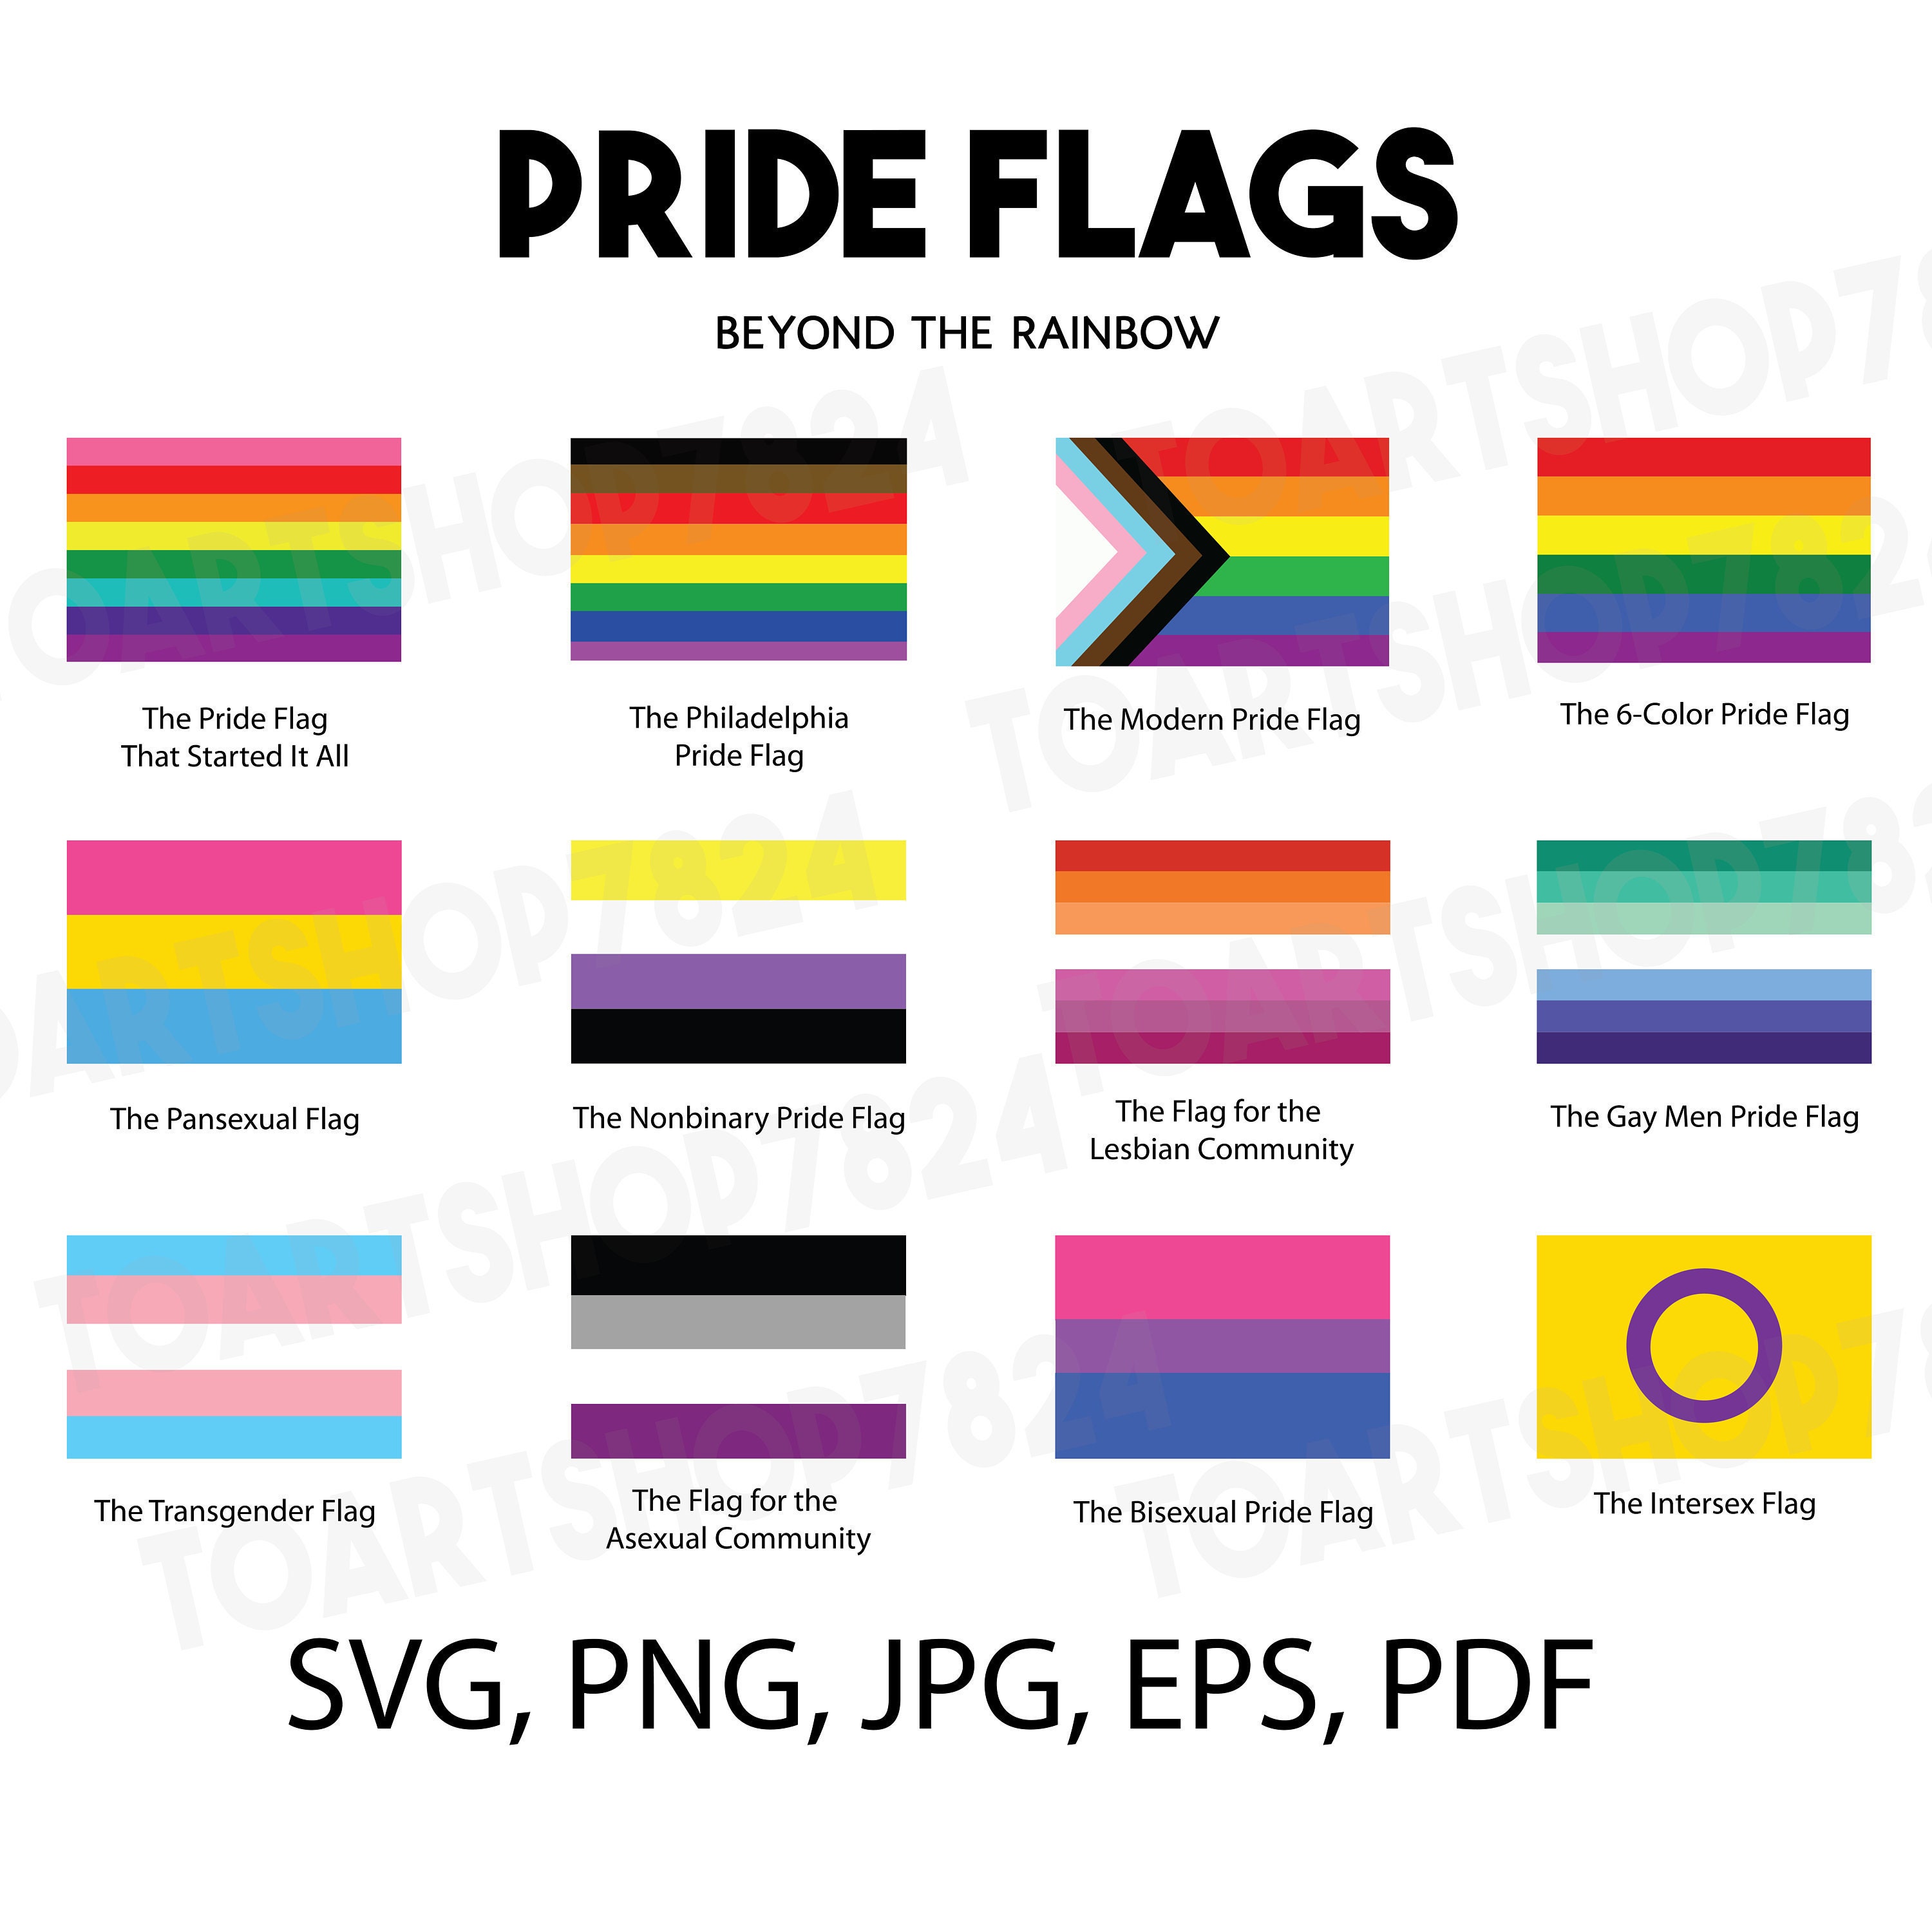 23 Lgbtq+ Pride Flags And What They Represent